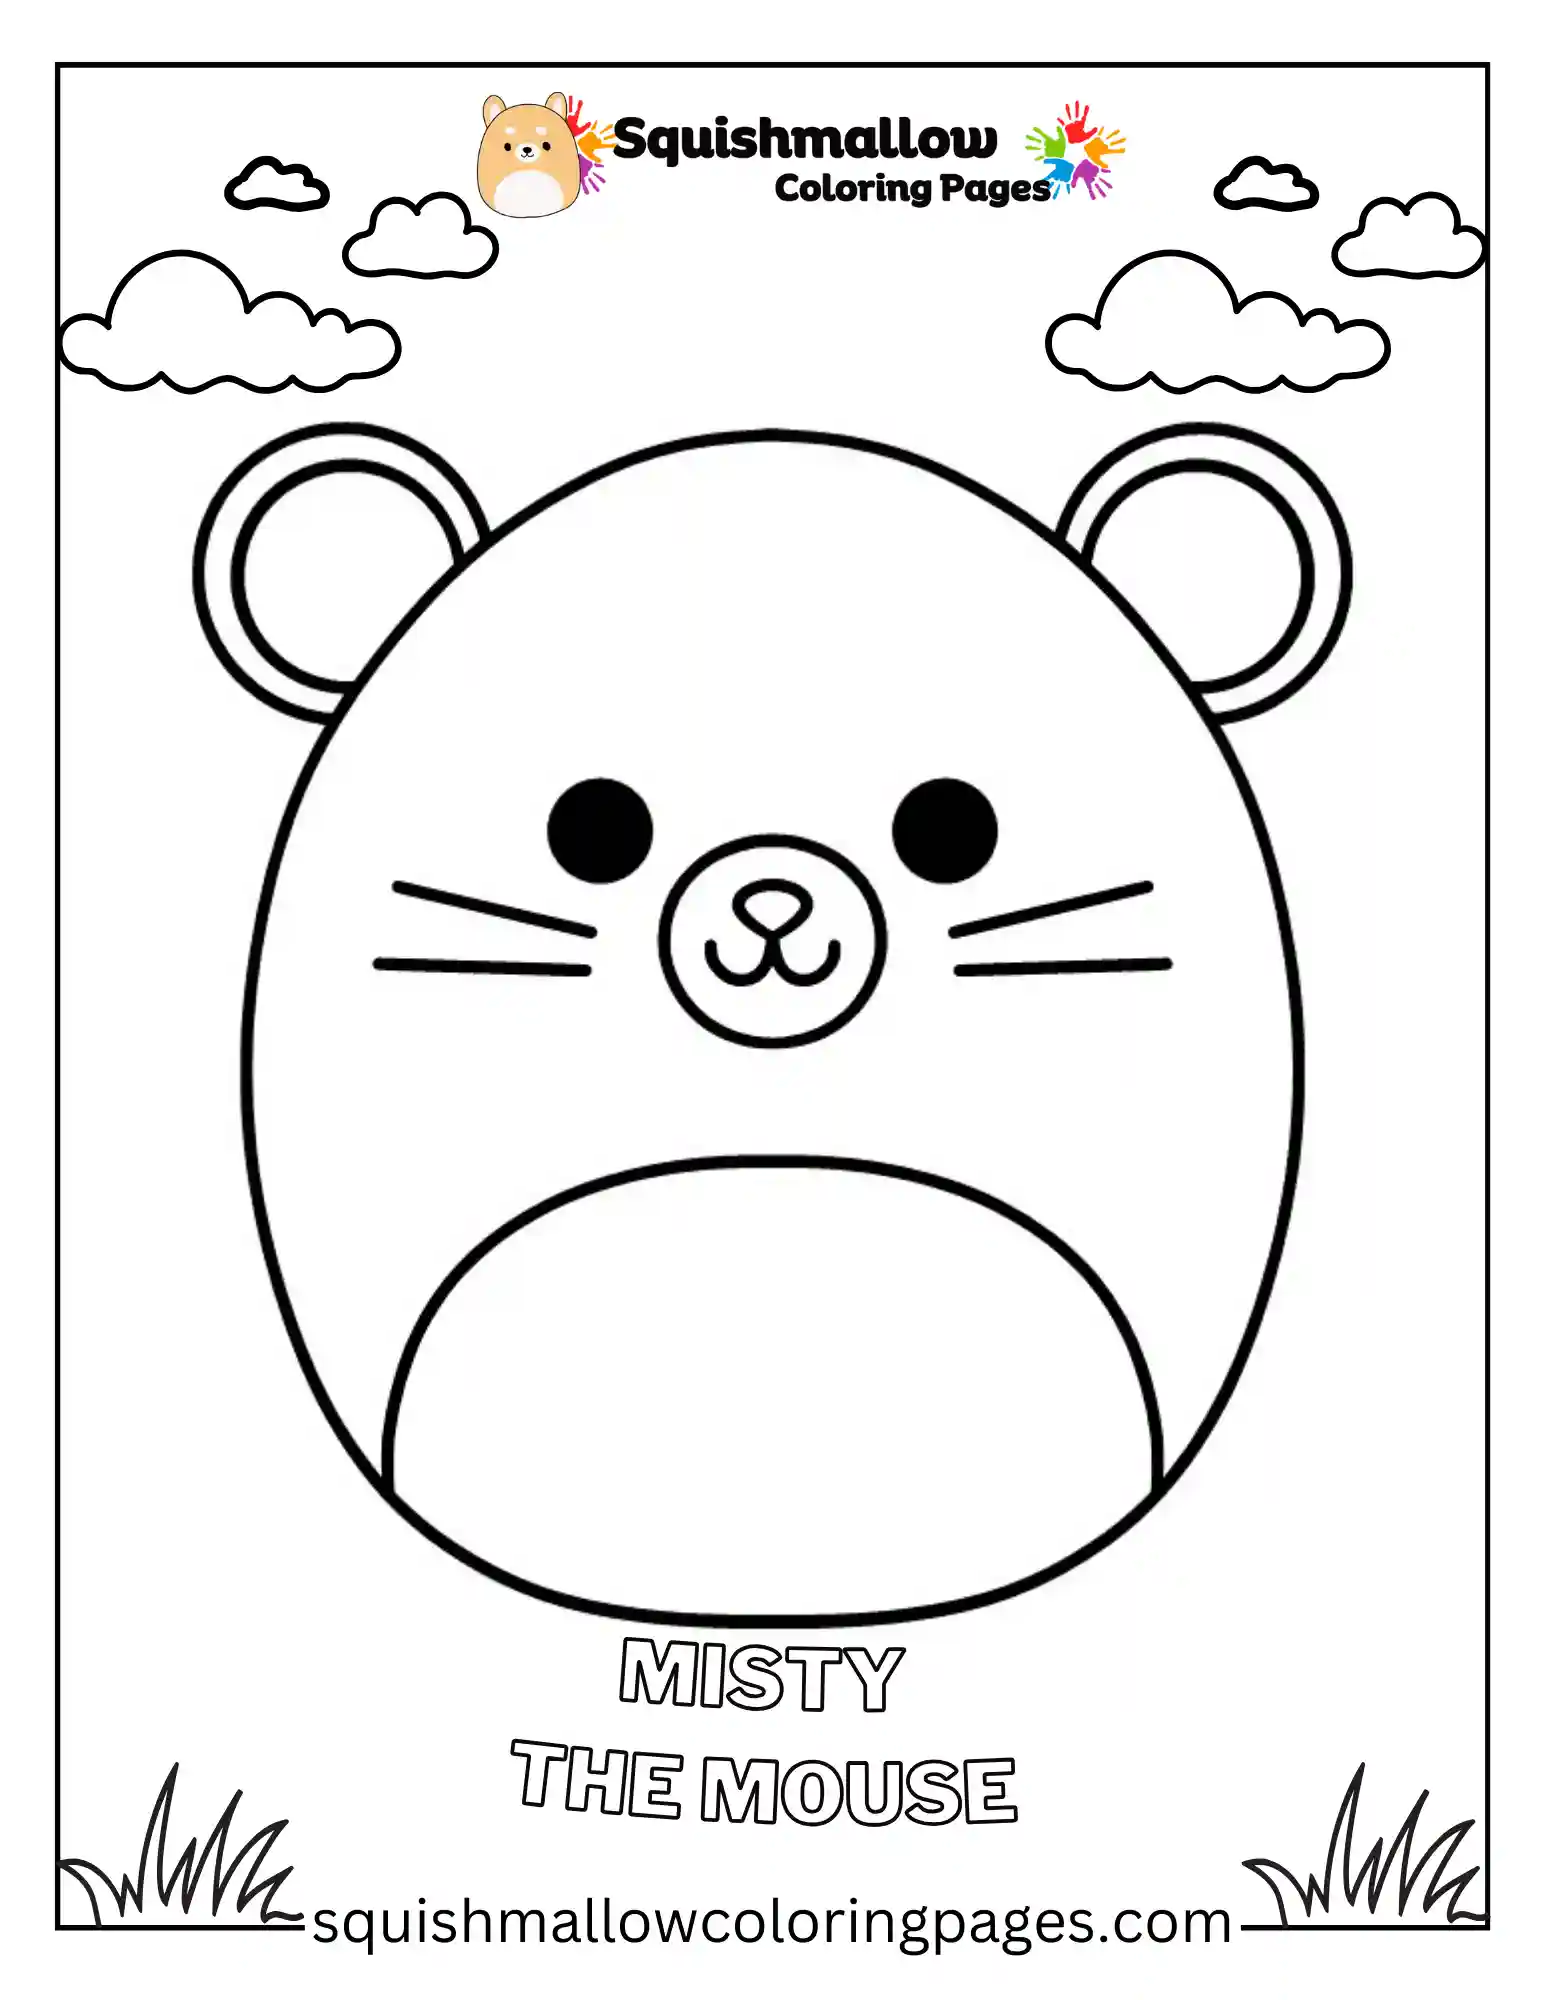 Misty The Mouse Squishmallow Coloring Pages